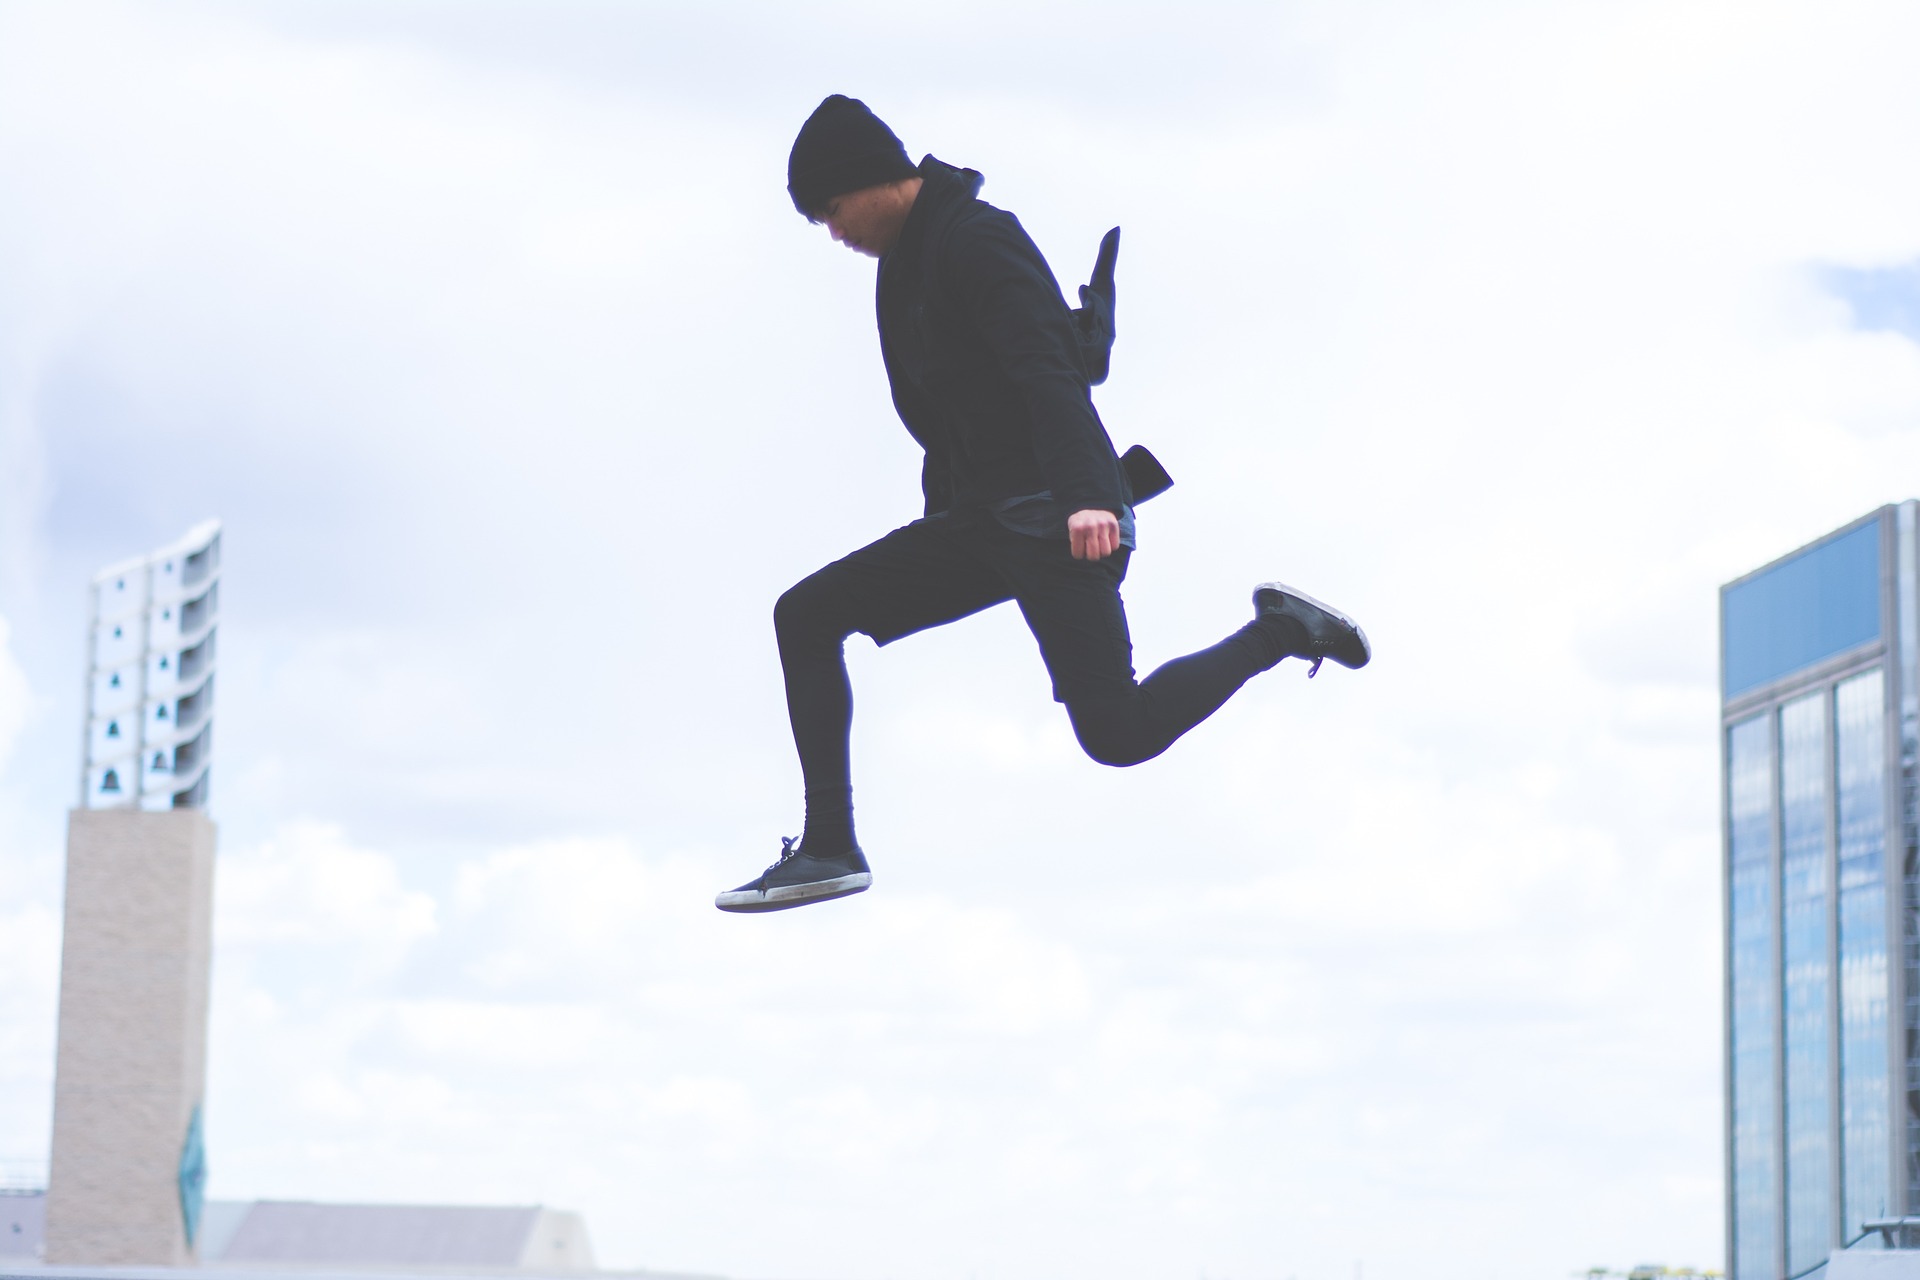 Man dressed in black jumping through the air with buildings in the background.